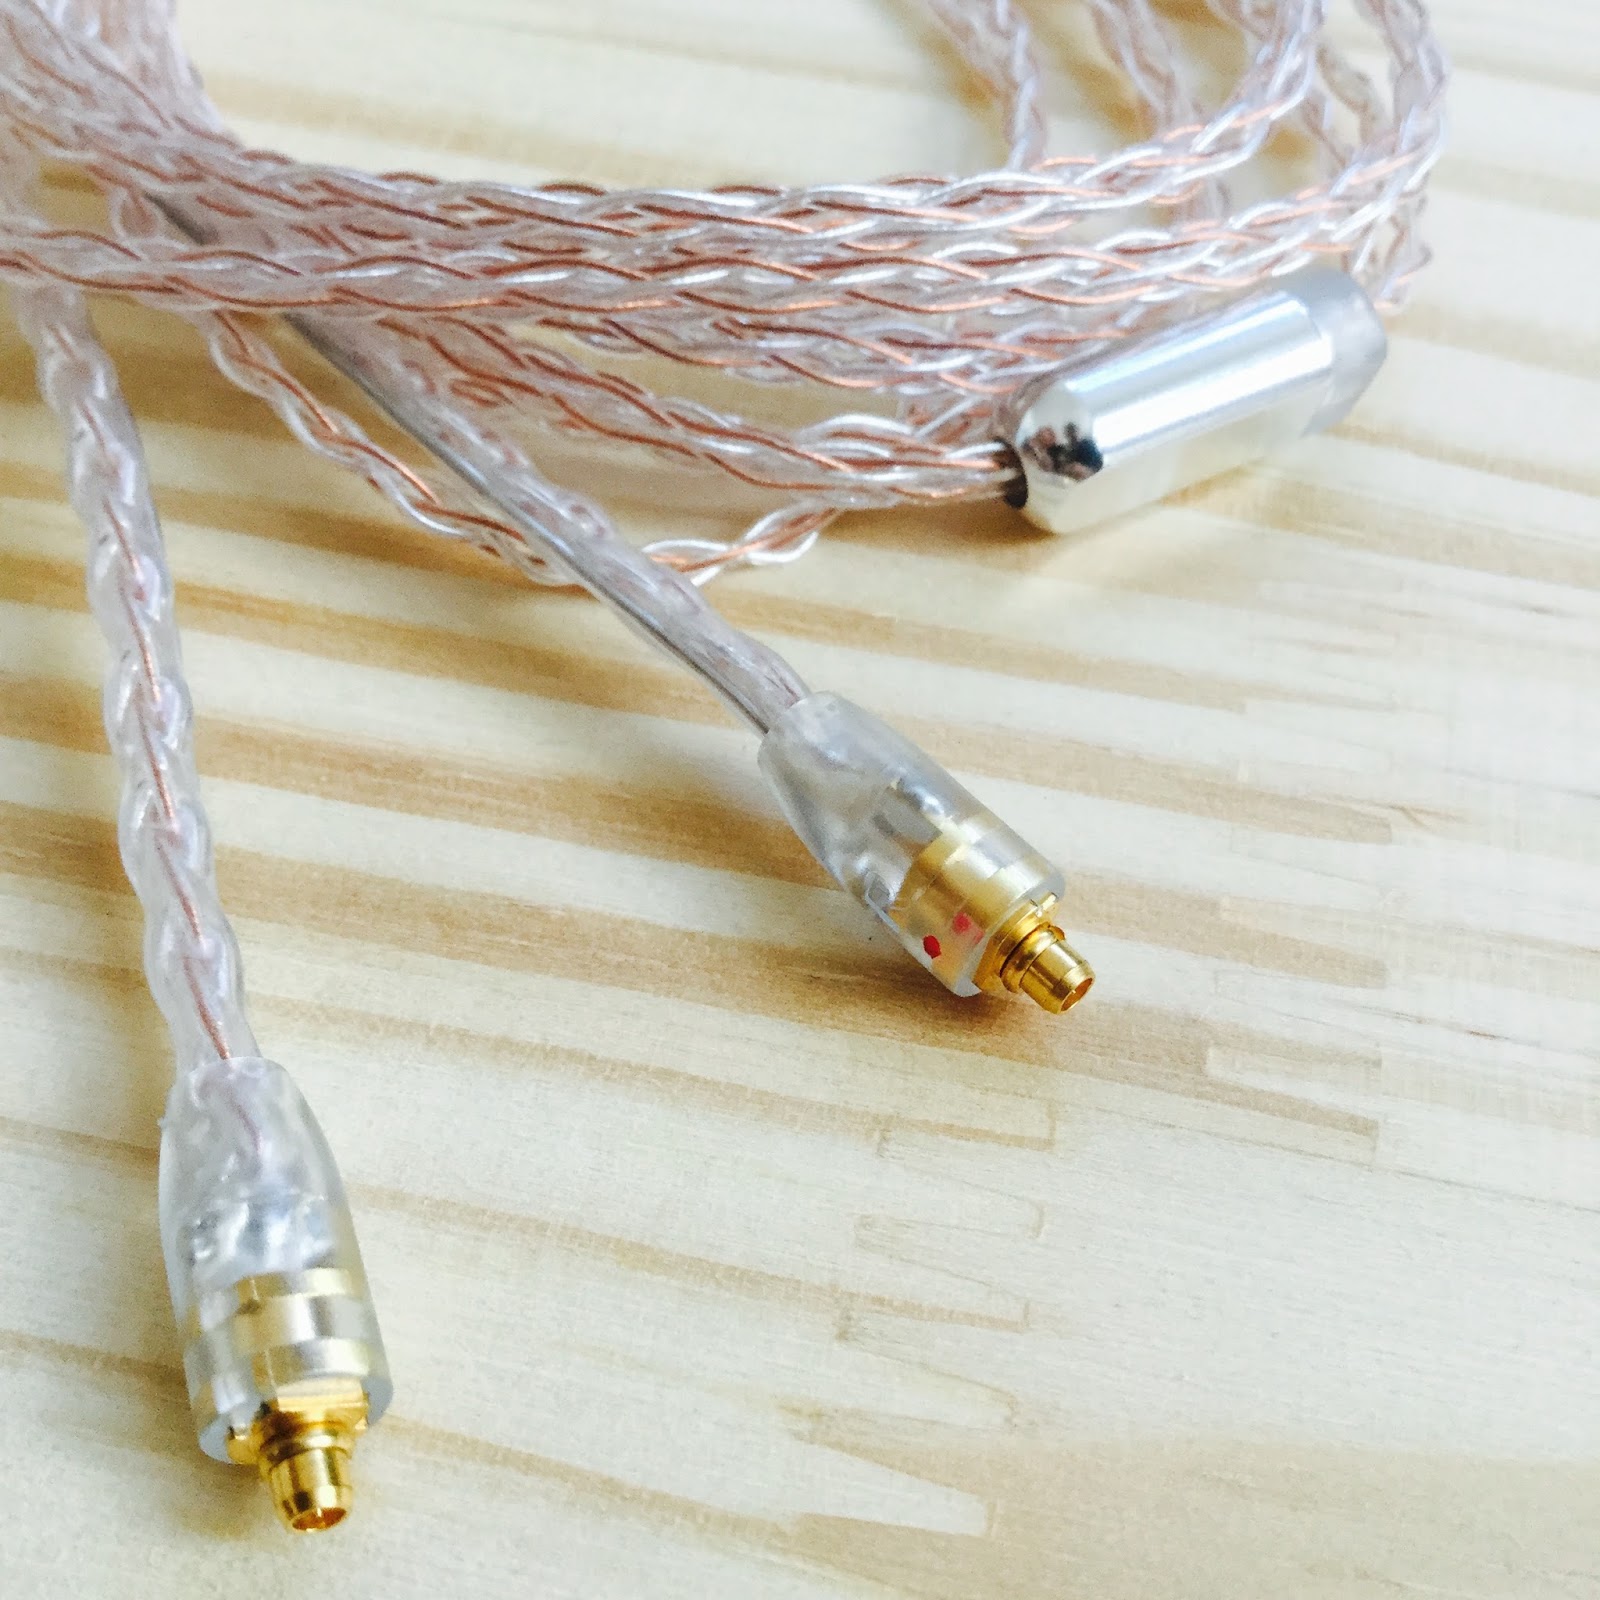 New ALO Audio Reference 8 IEM cables -expatinjapan